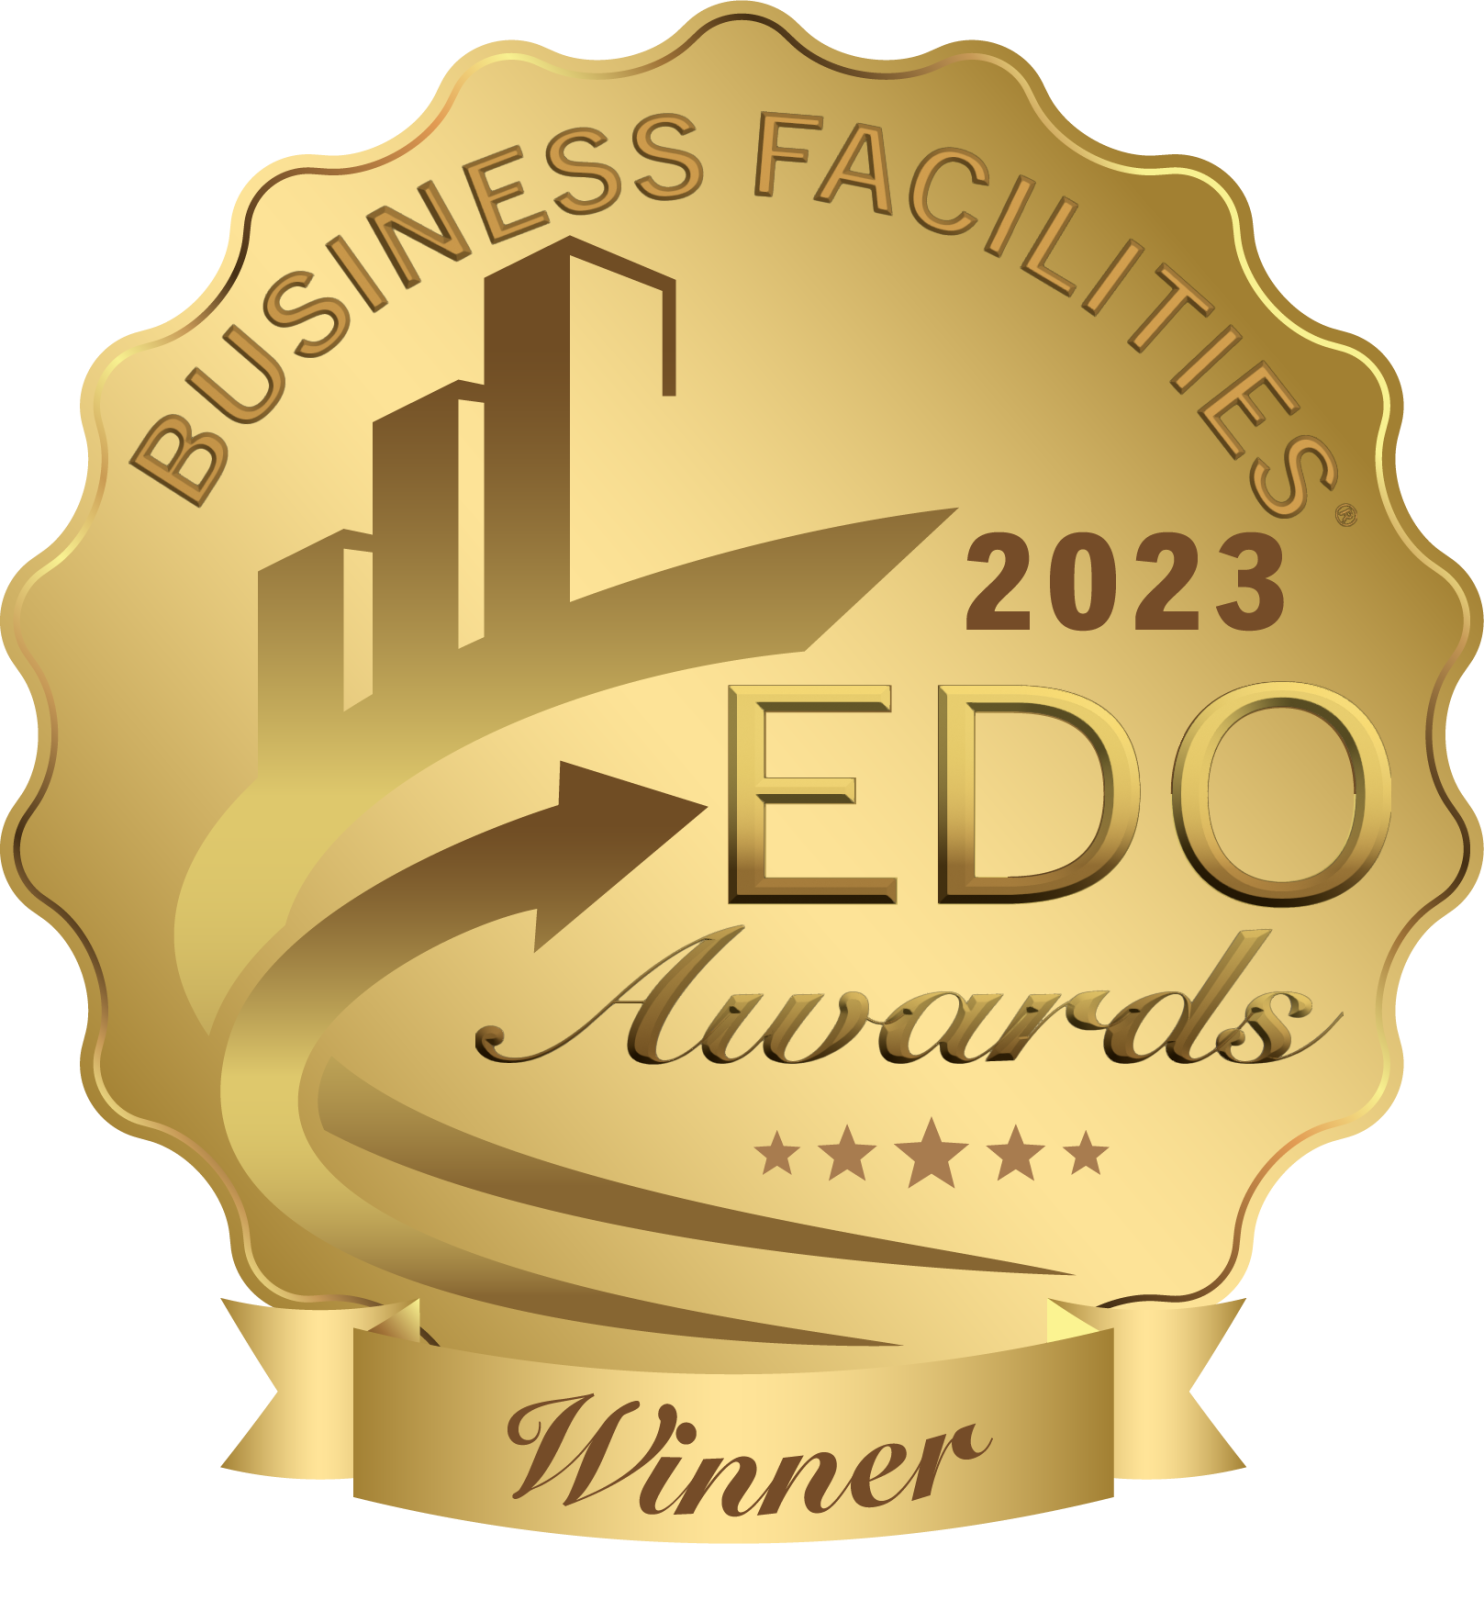 Click the Pflugerville Community Development Corporation wins EDO Award 2023 from Business Facilities Slide Photo to Open